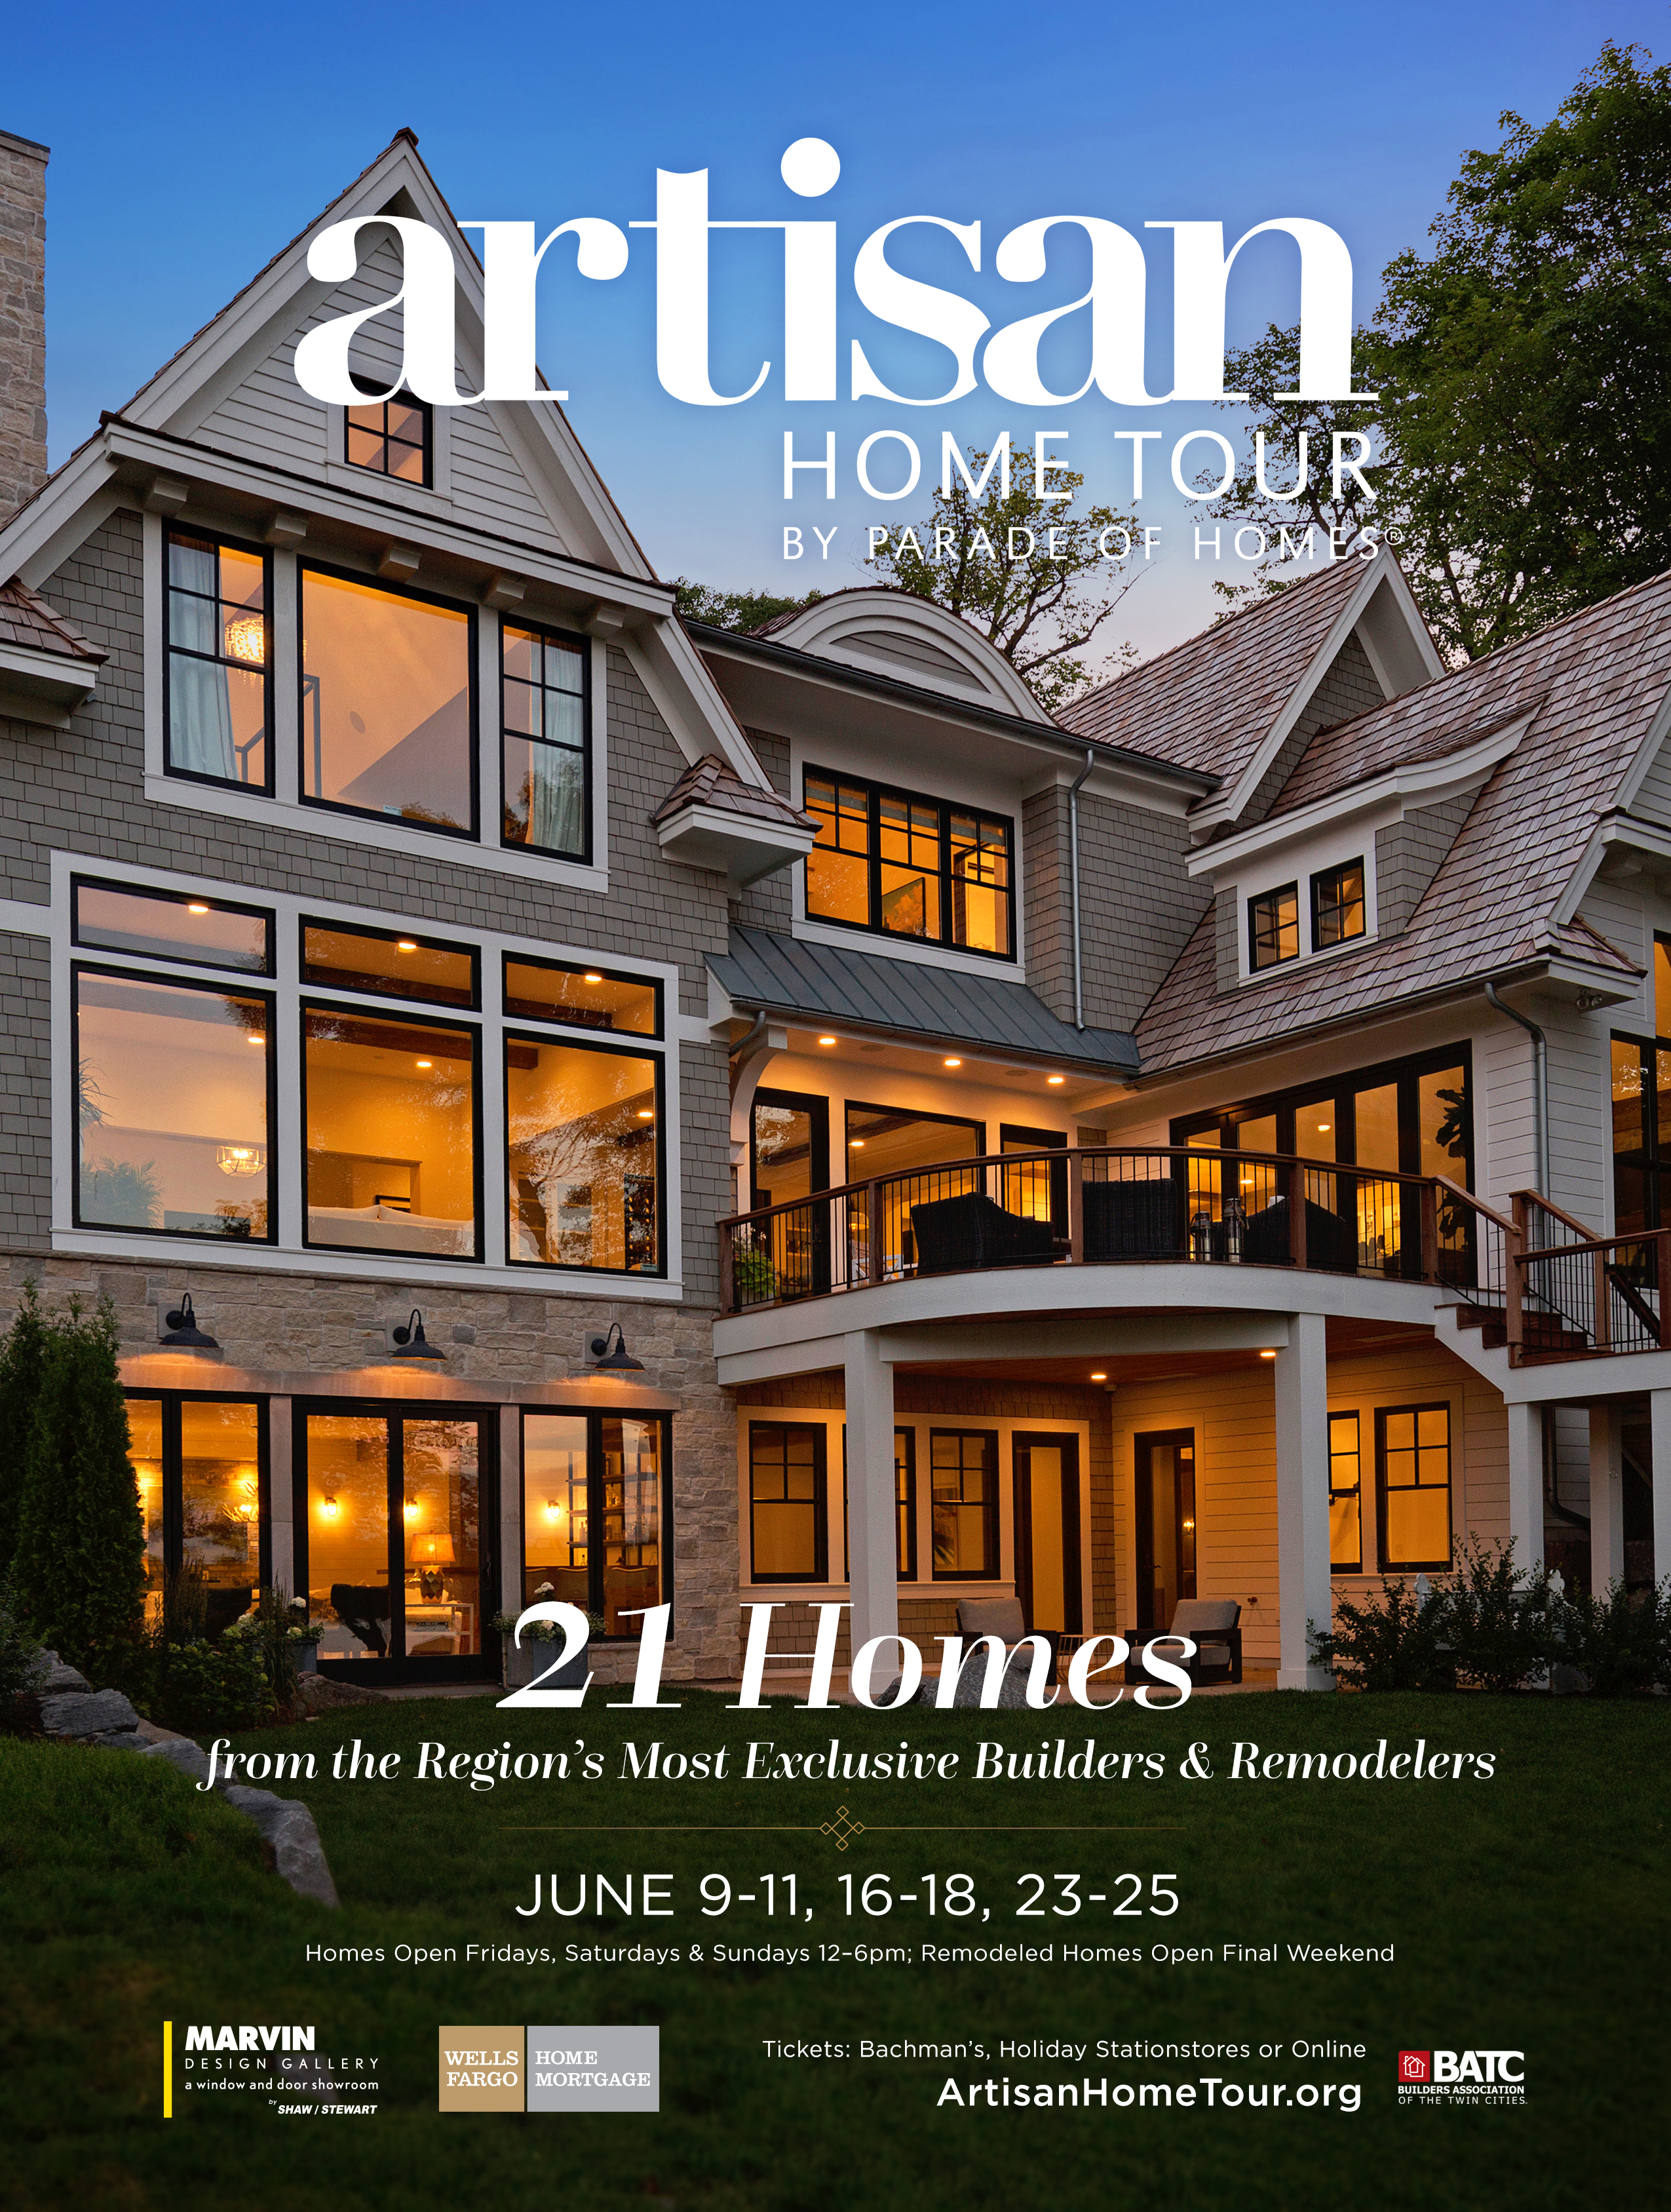 Image for Fourth Annual Artisan Home Tour by Parade of Homes®